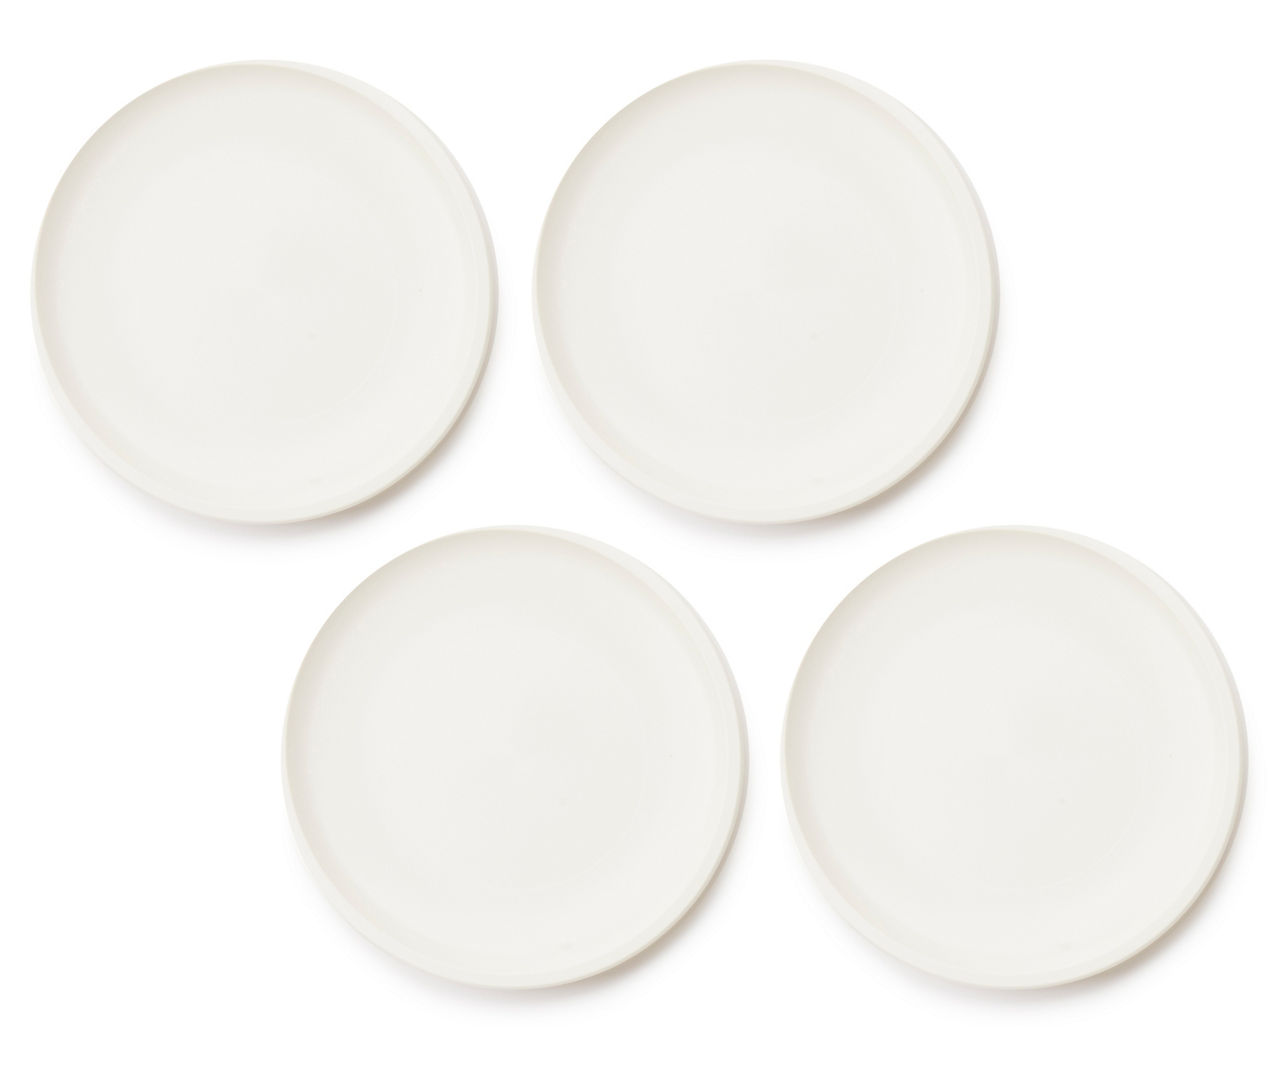 Progress International P7P-PS50W 9.75 in. White Microwave Plates, Pack of 4